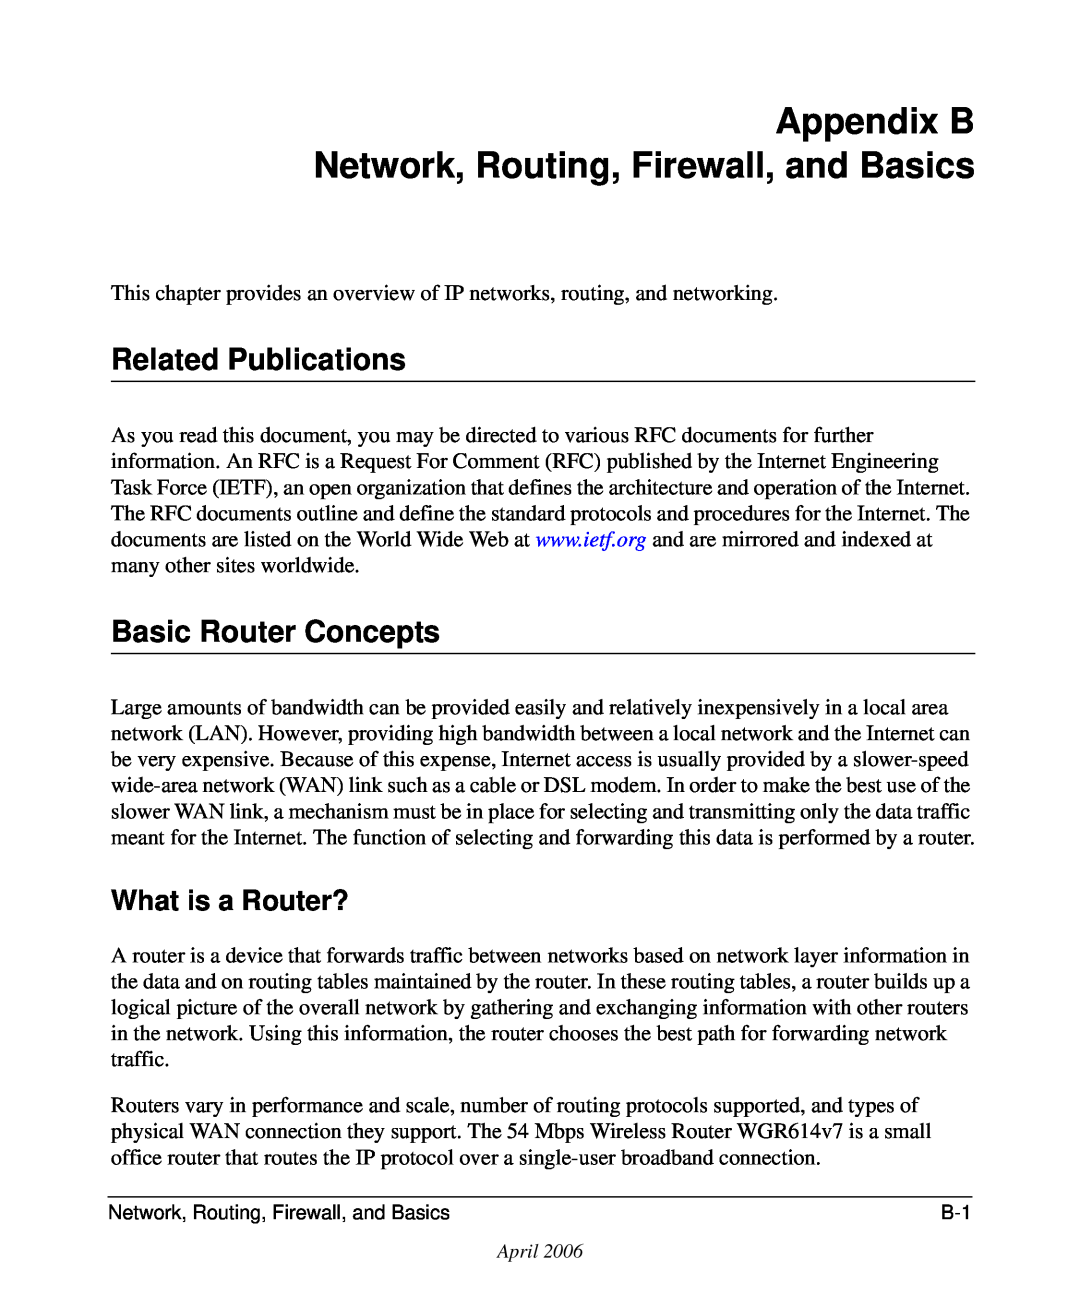 NETGEAR WGR614v7 manual Appendix B Network, Routing, Firewall, and Basics, Related Publications, Basic Router Concepts 